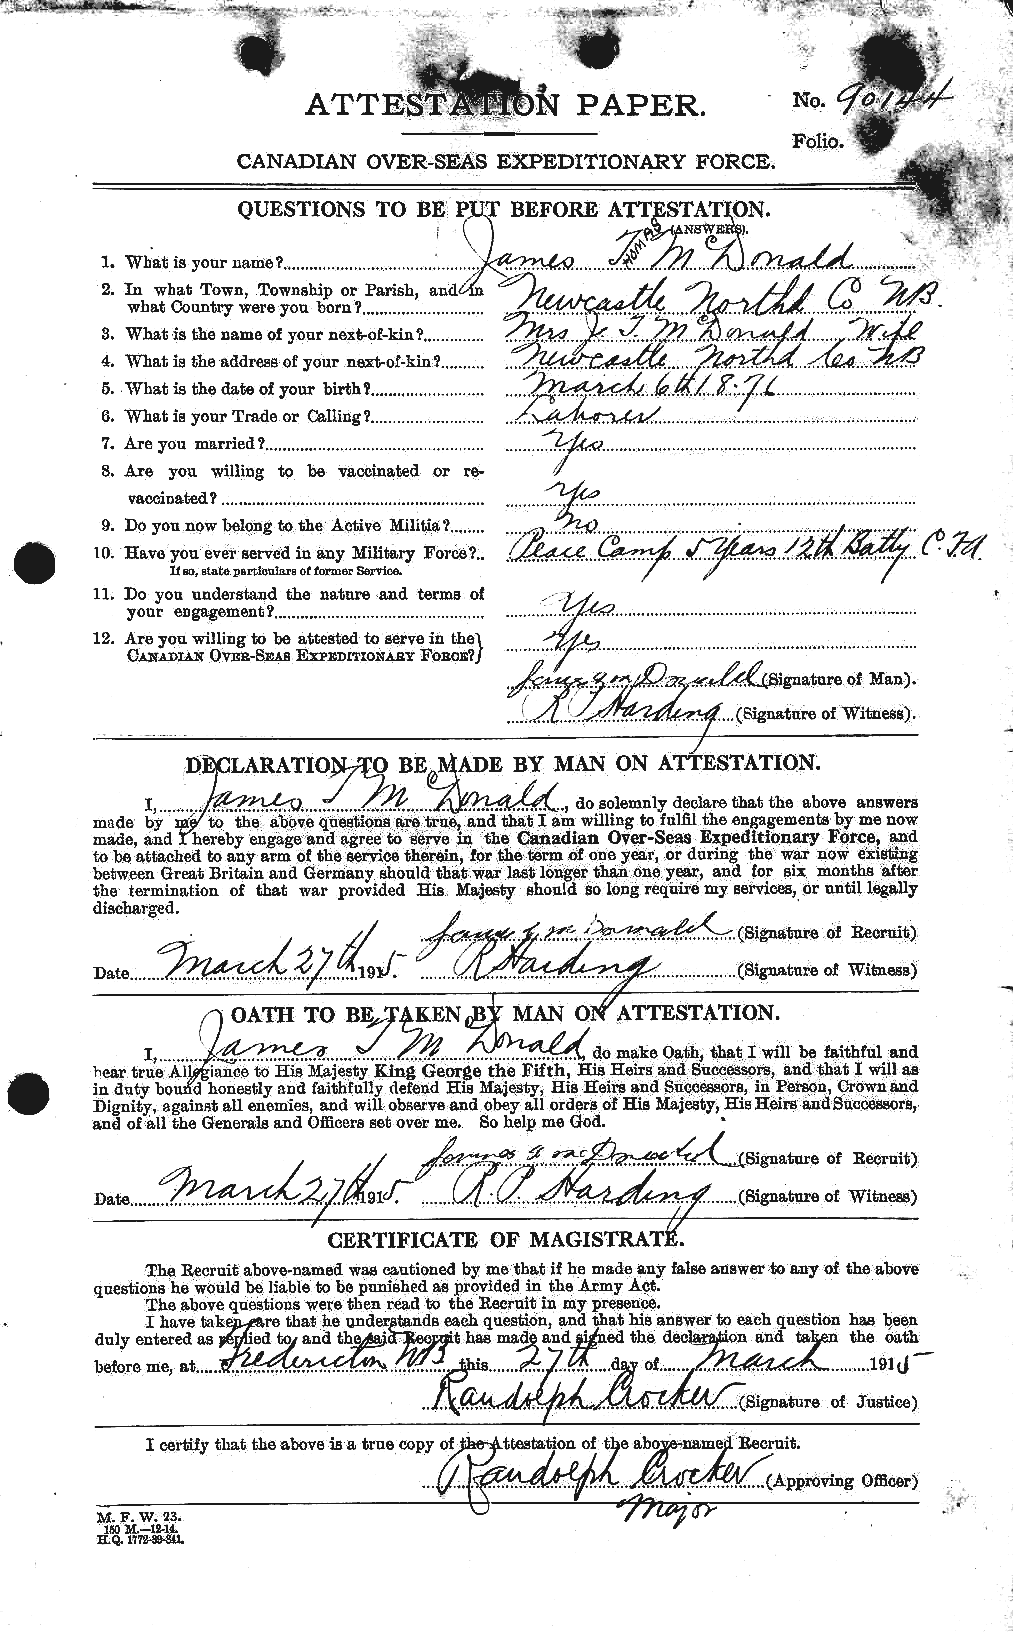 Personnel Records of the First World War - CEF 522951a